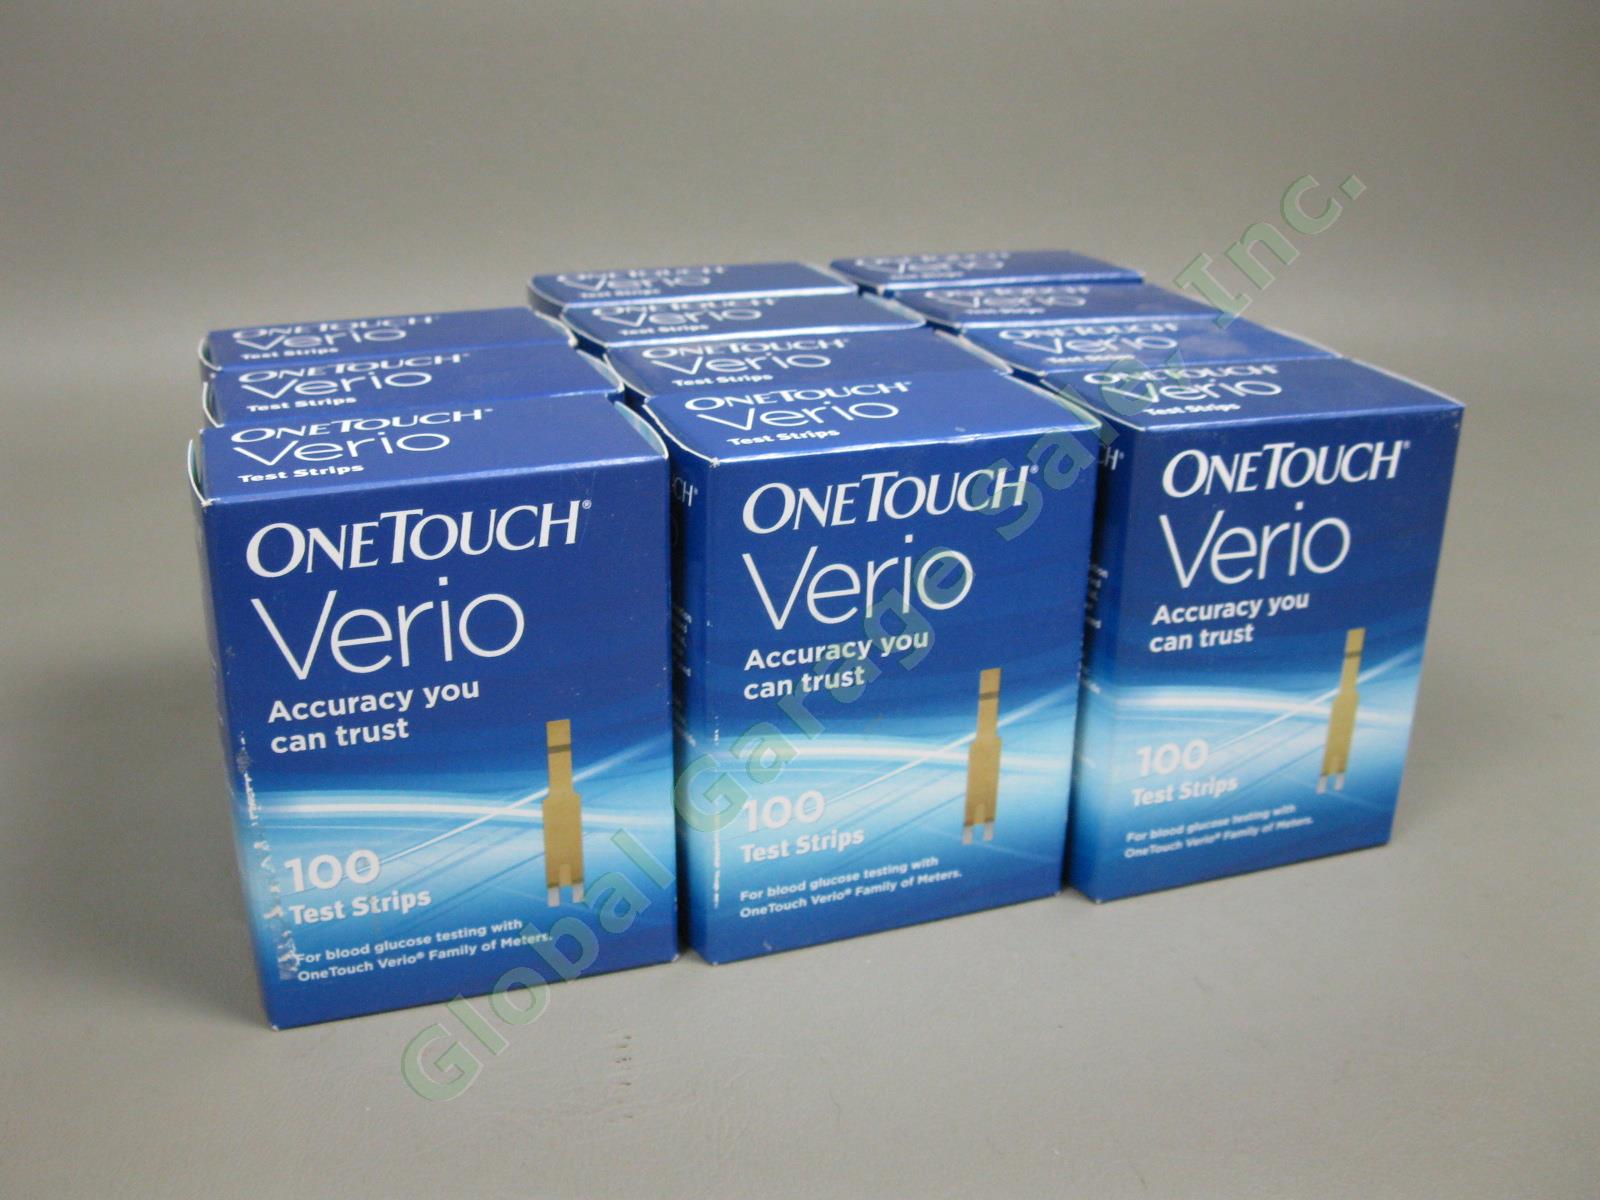 1100 NEW OneTouch Verio Diabetic Glucose Test Strips Sealed Lot Exp 2018-2019 NR